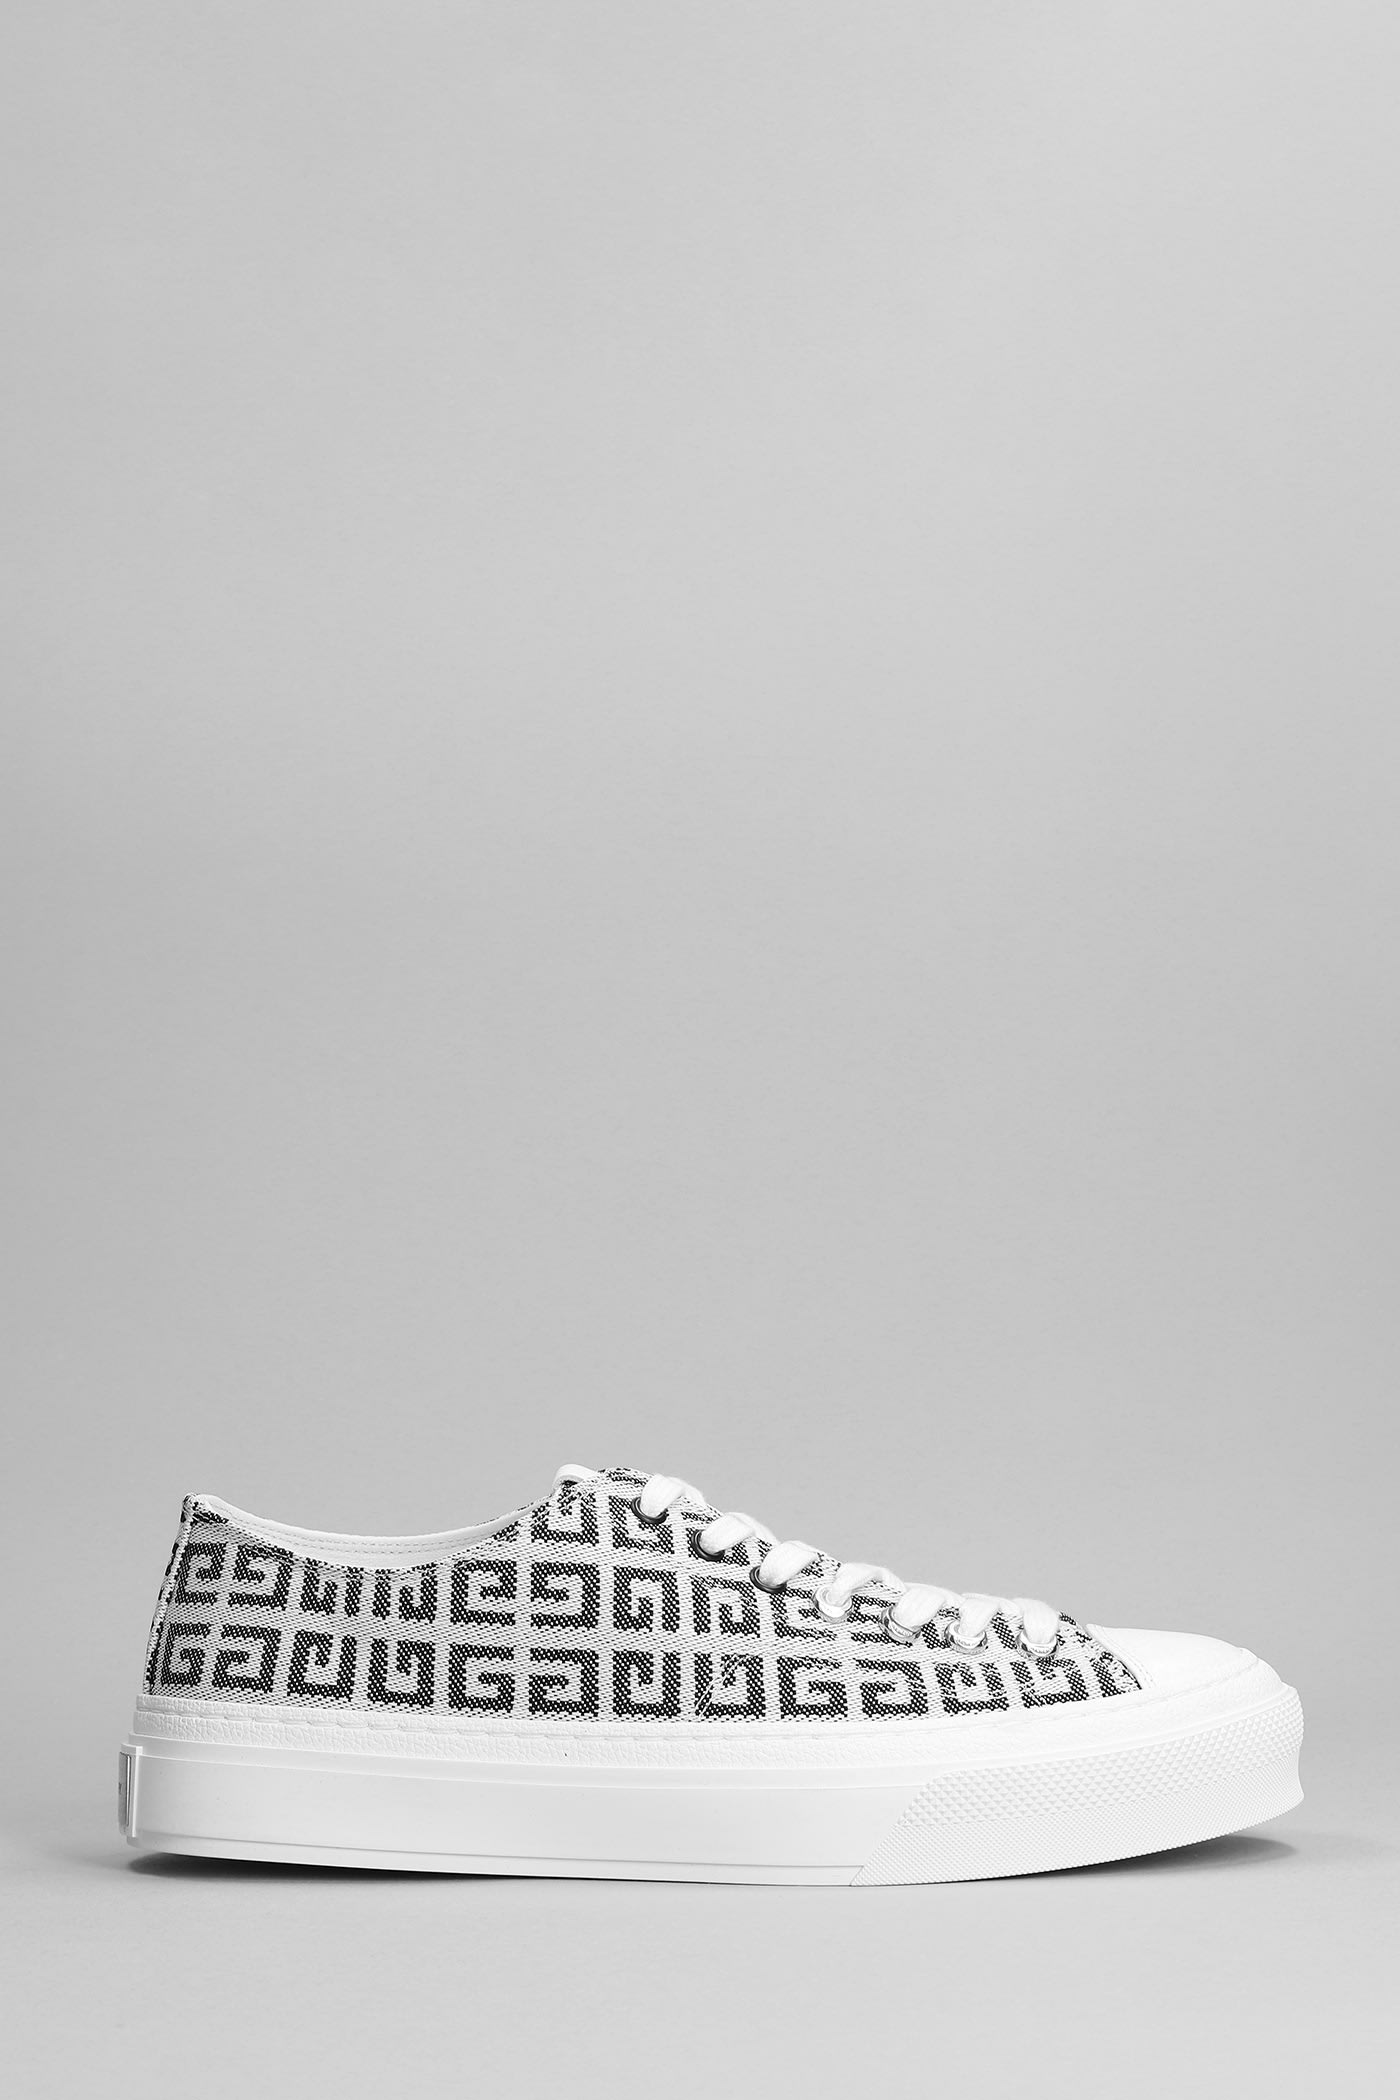 Givenchy Sneakers In Black Cotton